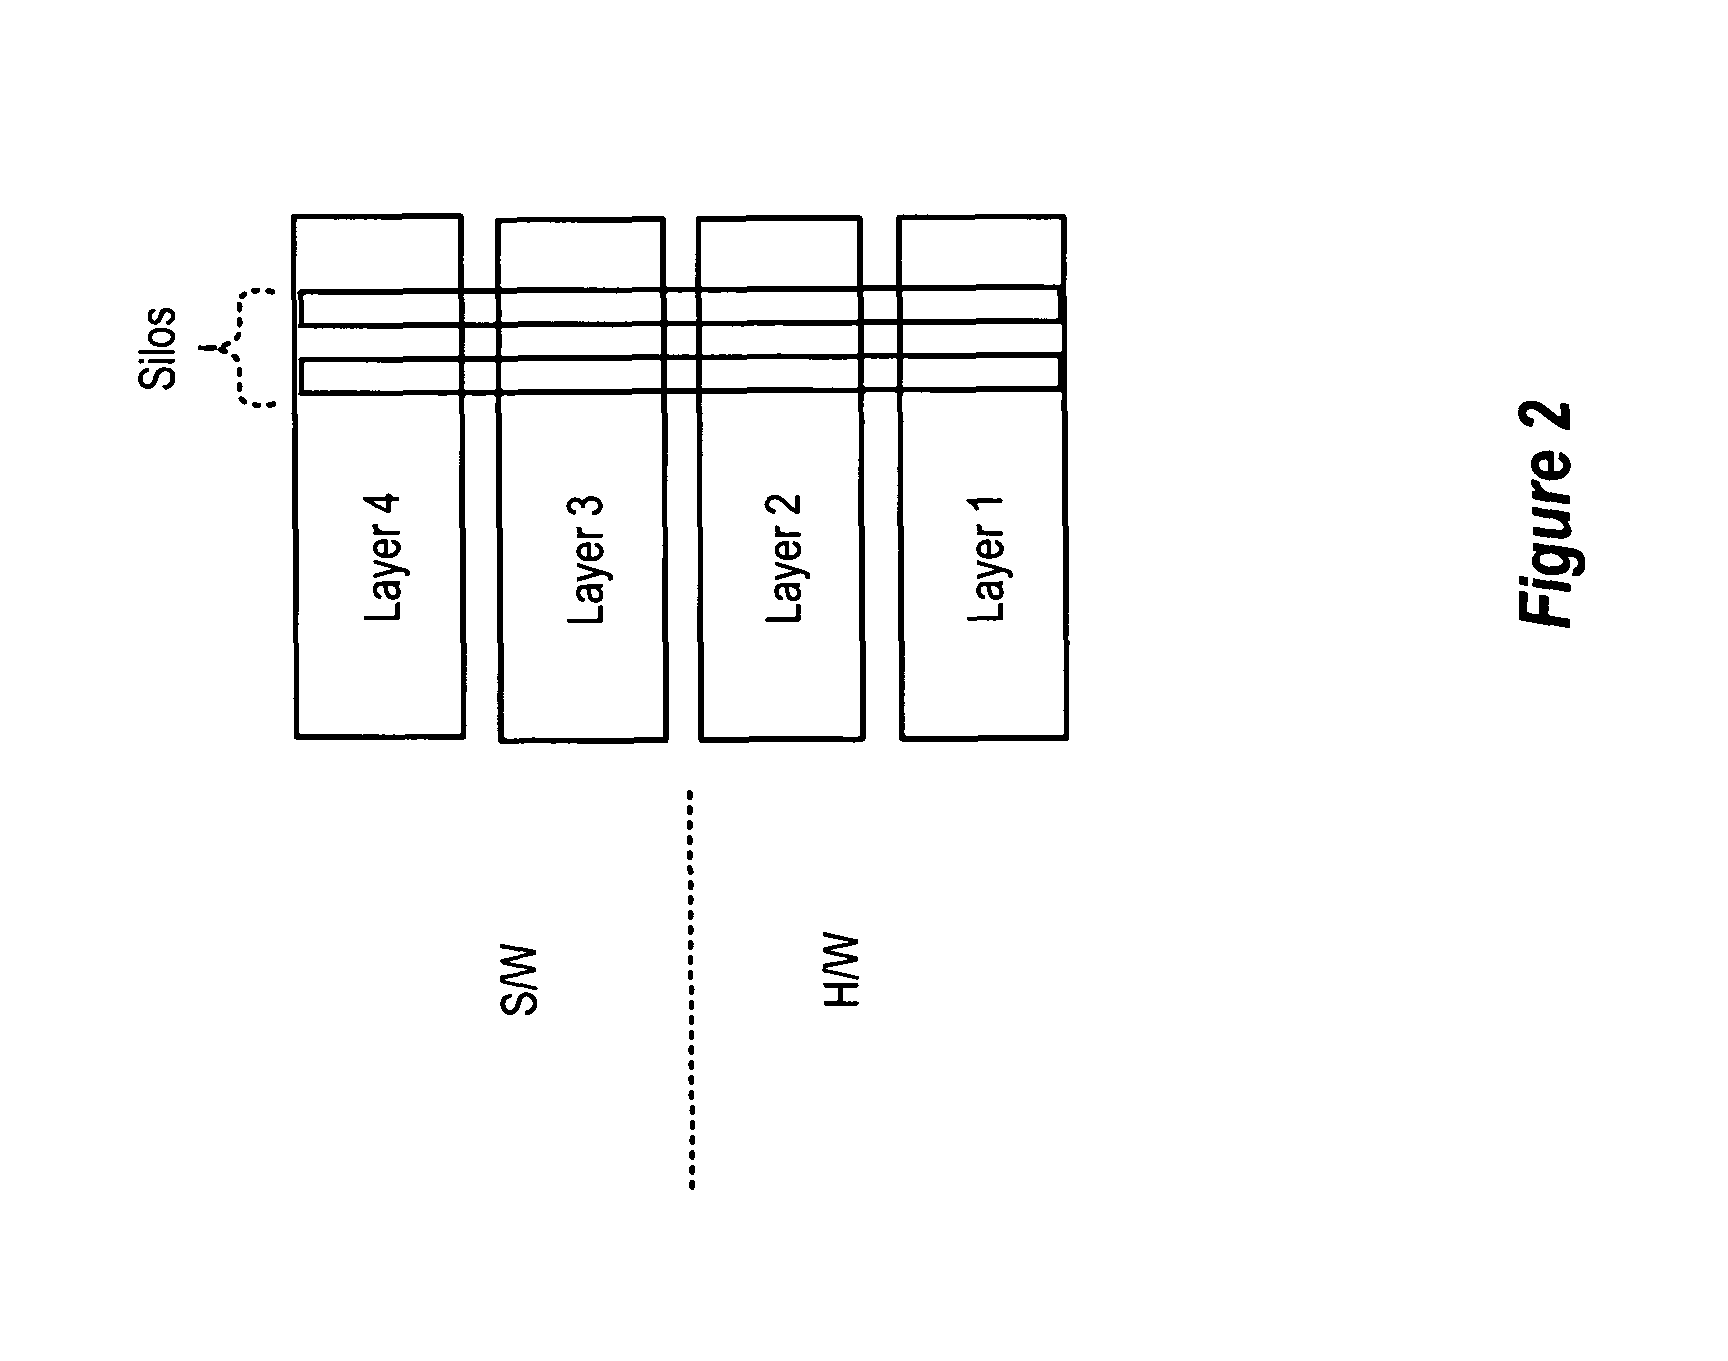 Method and apparatus for arbitrarily mapping functions to preassigned processing entities in a network system